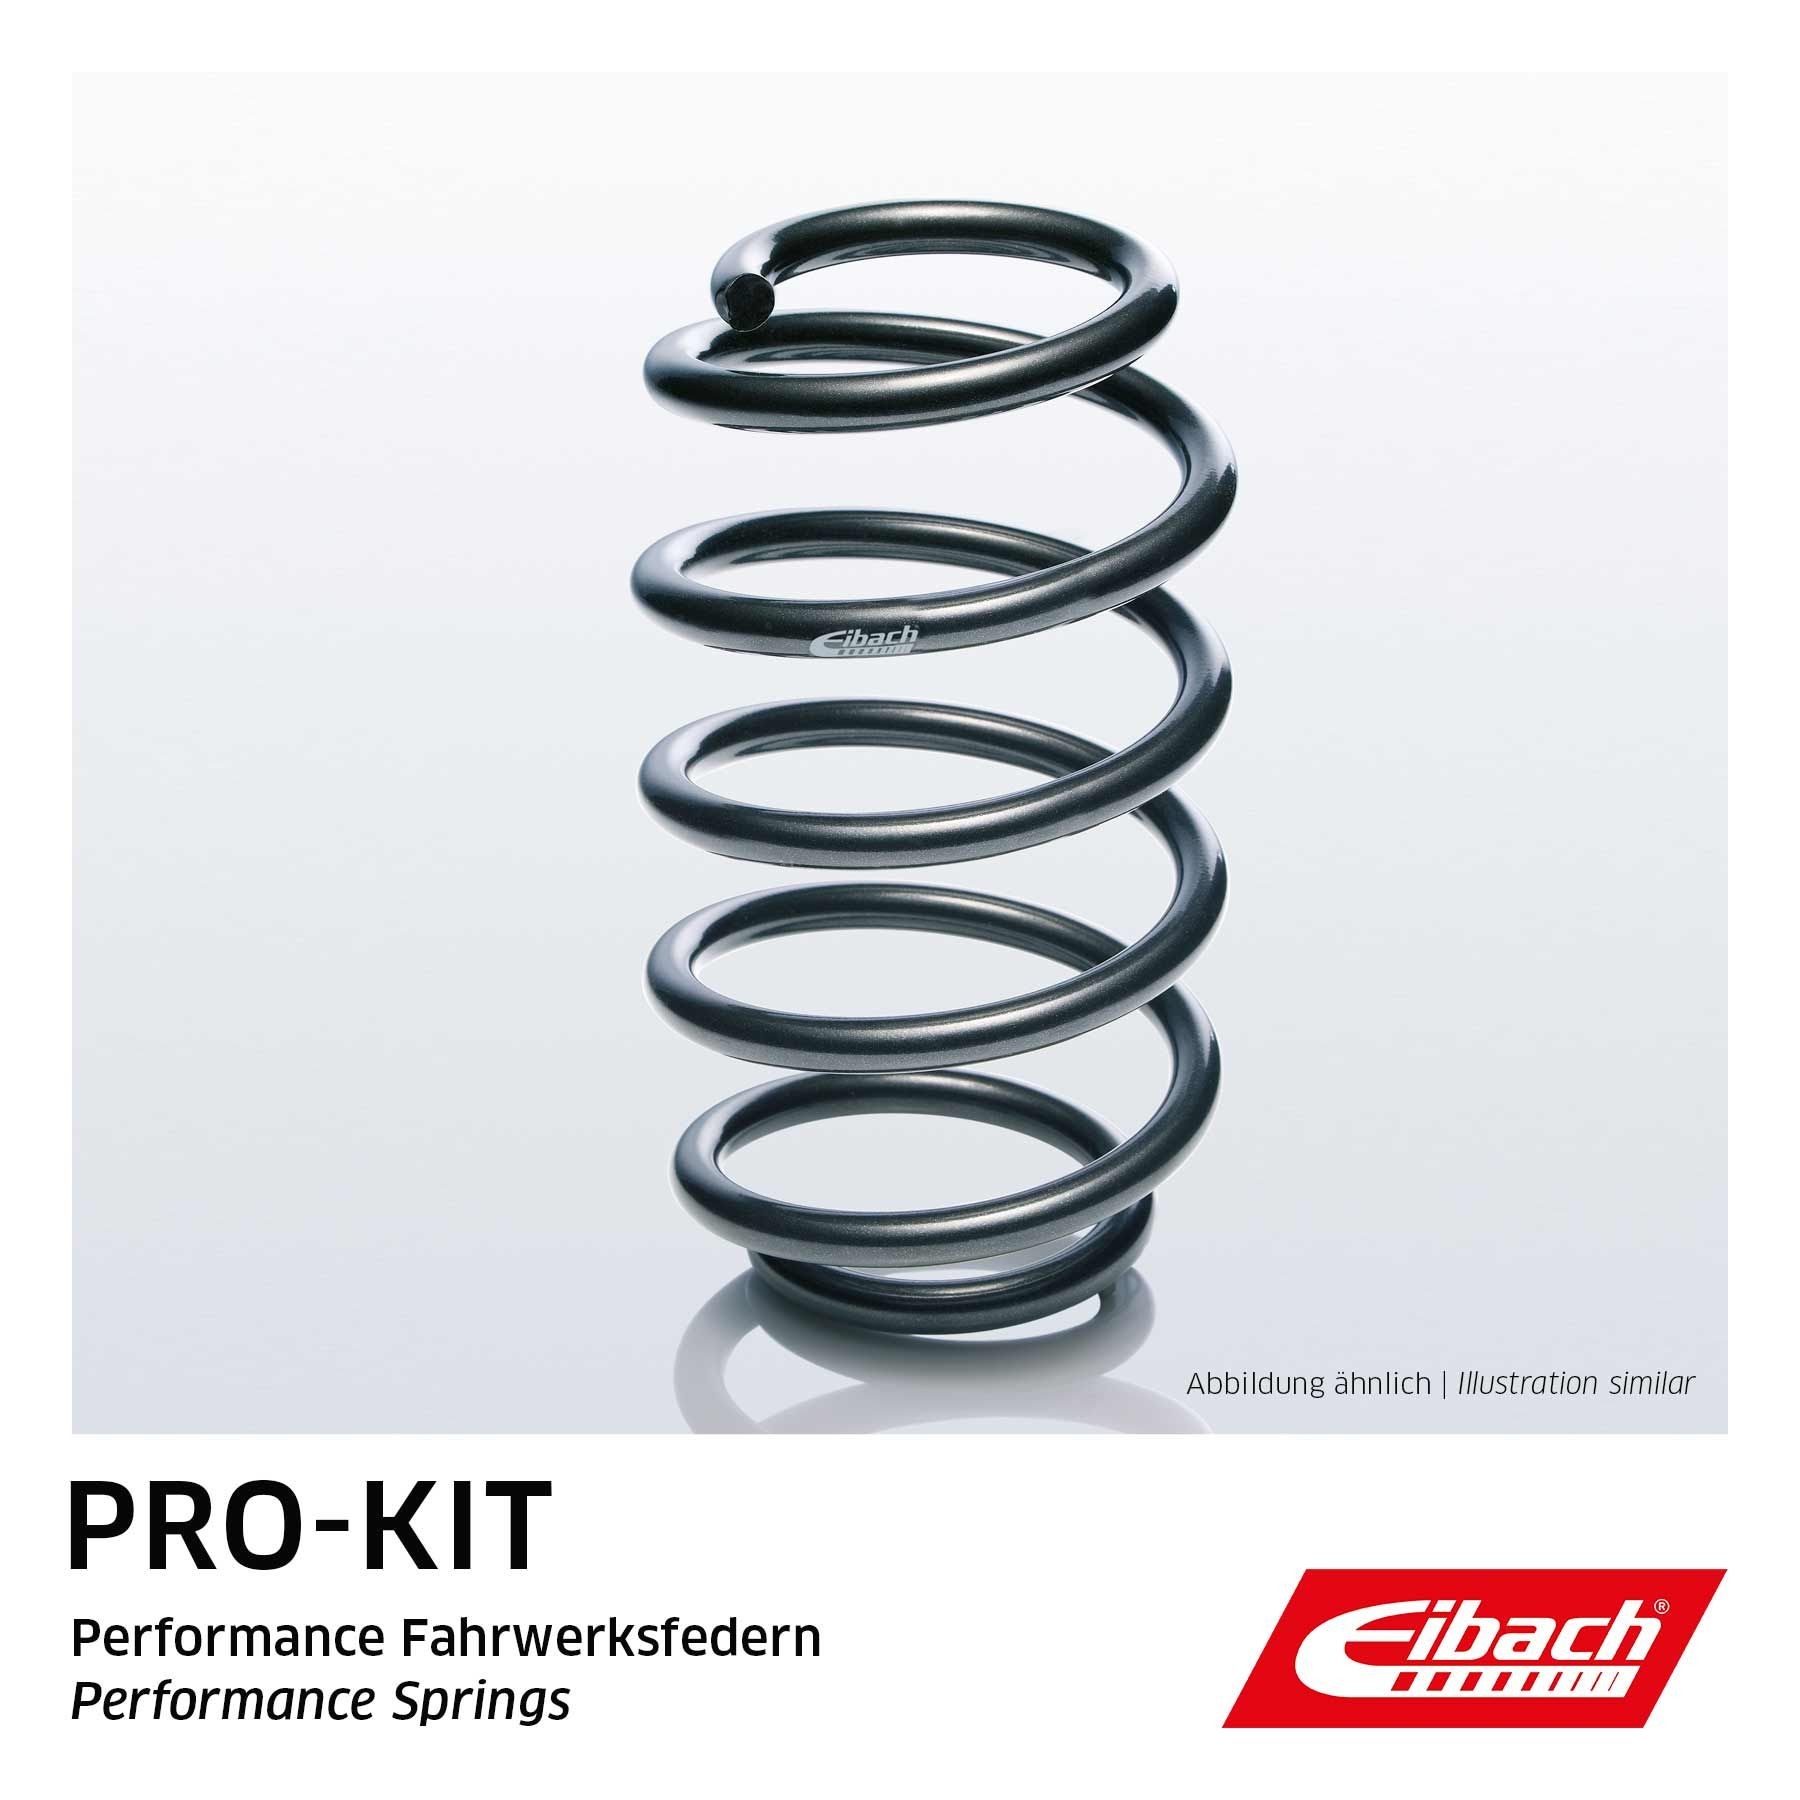 EIBACH Springs rear and front AUDI A4 Convertible (8H7, B6, 8HE, B7) new F11-15-003-10-HA